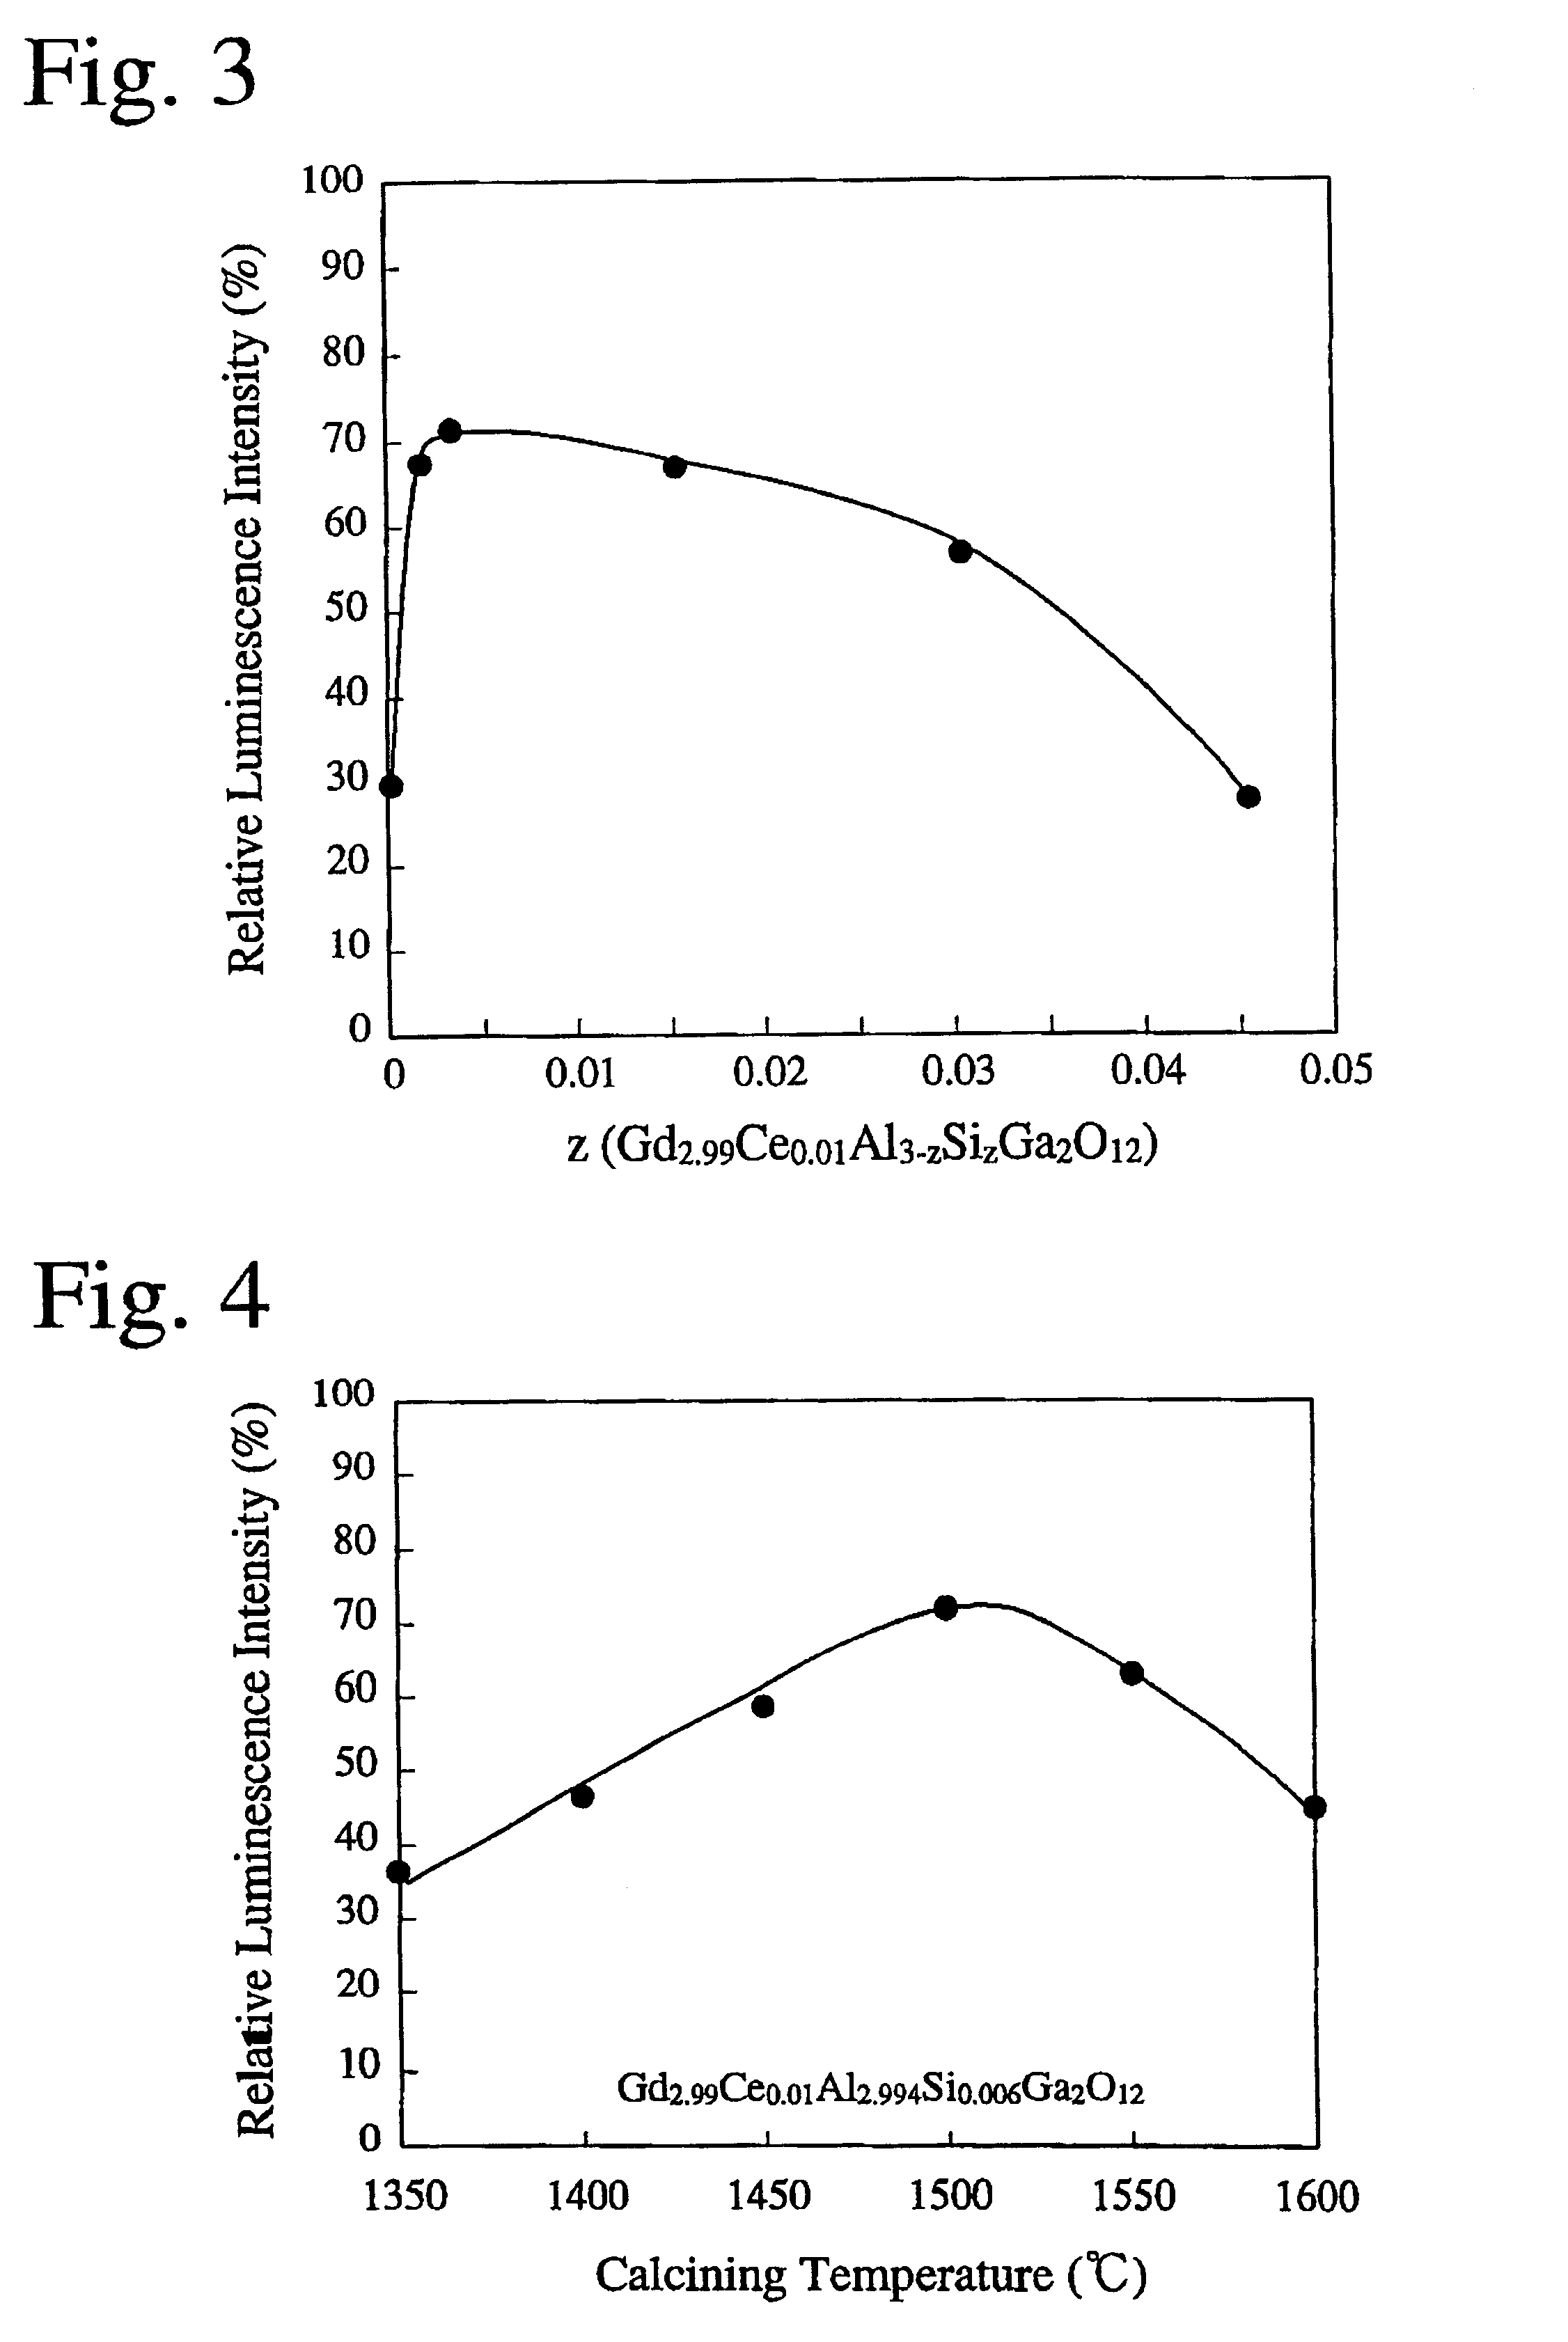 Ceramics and their power for scintillators, and method for producing same